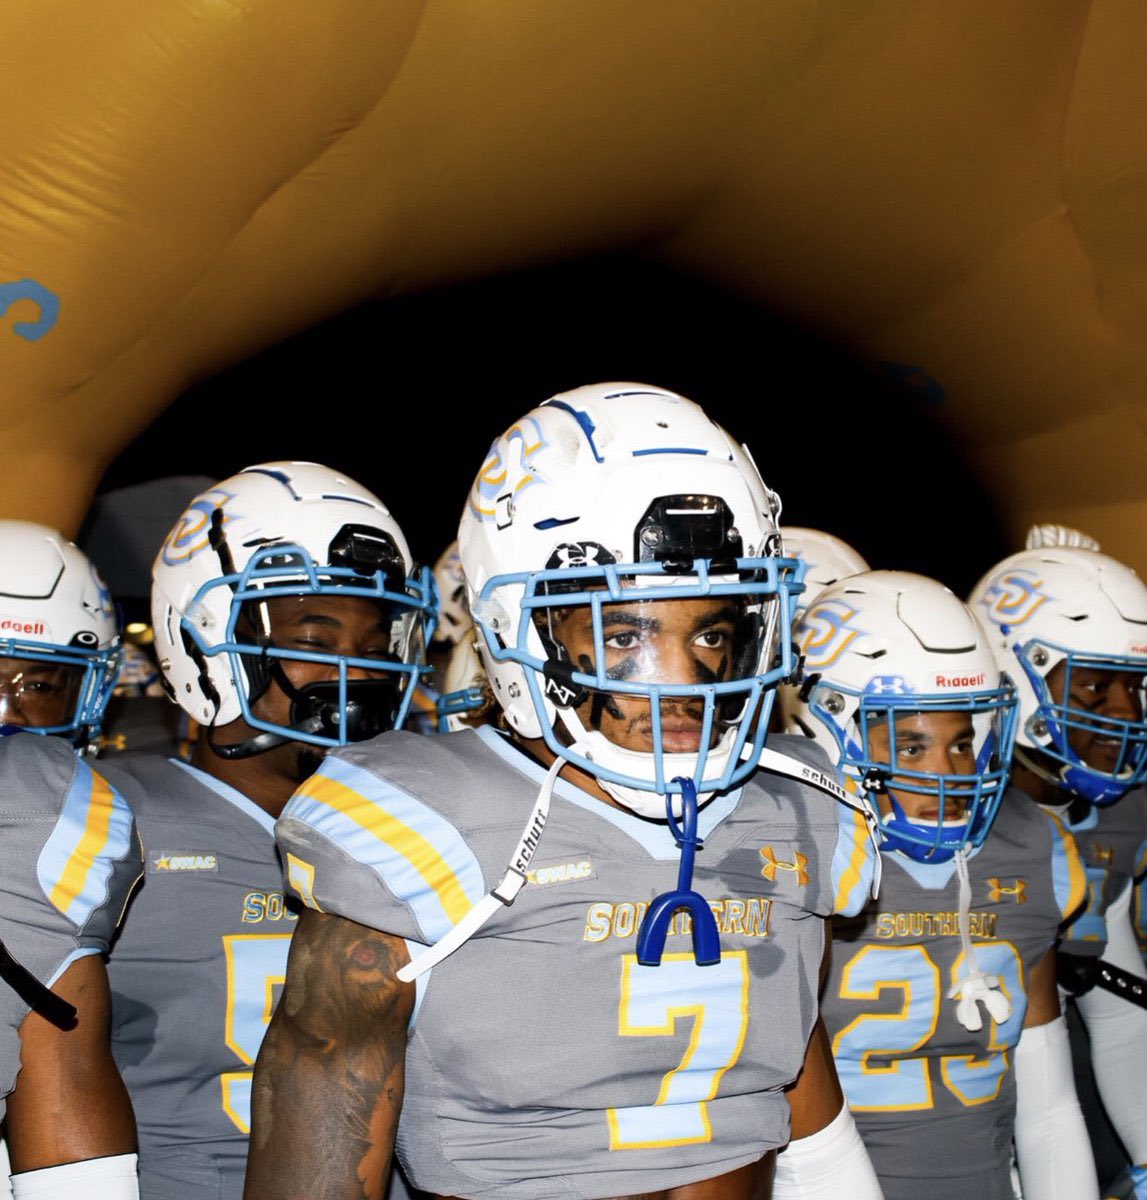 Blessed to receive an offer from Southern University!! @GeauxJags @JPBandits